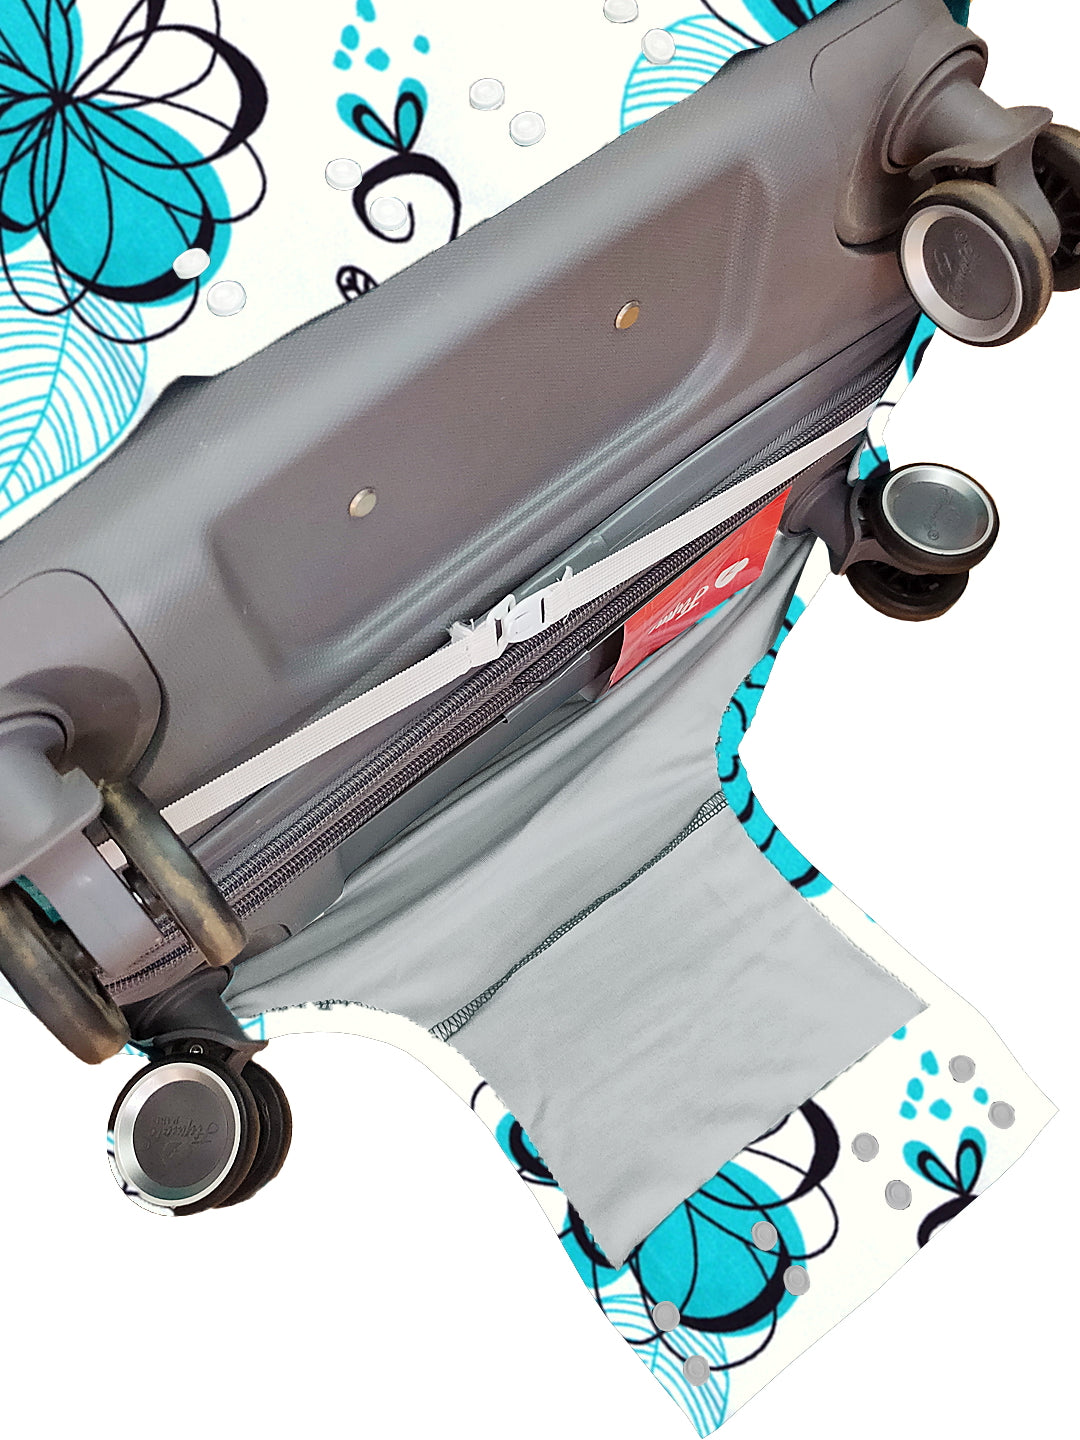 Stretchable Printed Protective Luggage Bag Cover Small- Turquoise